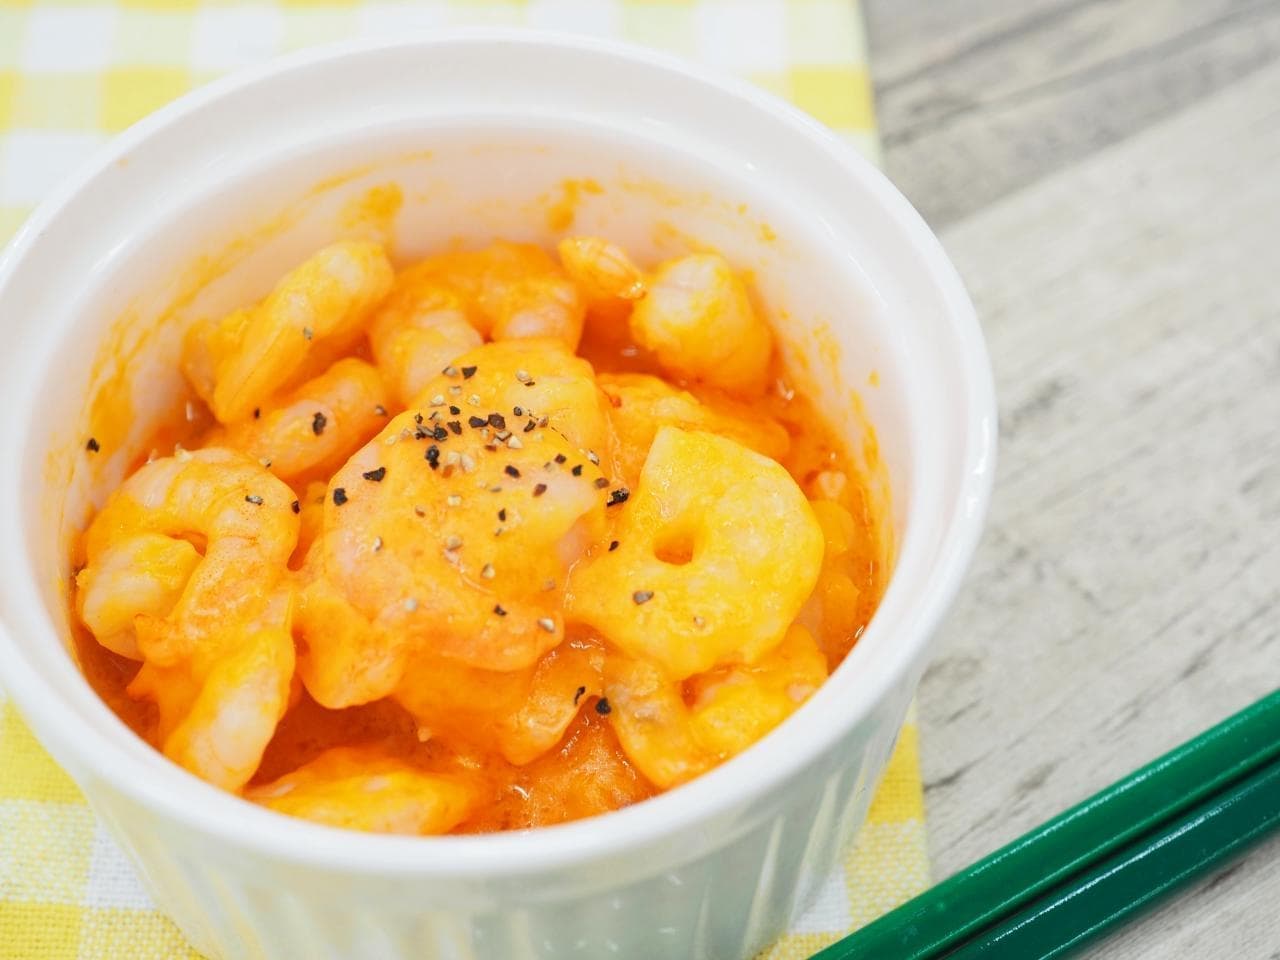 Just a quick and easy "Shrimp Mayo" with just a quick lenght cooking!